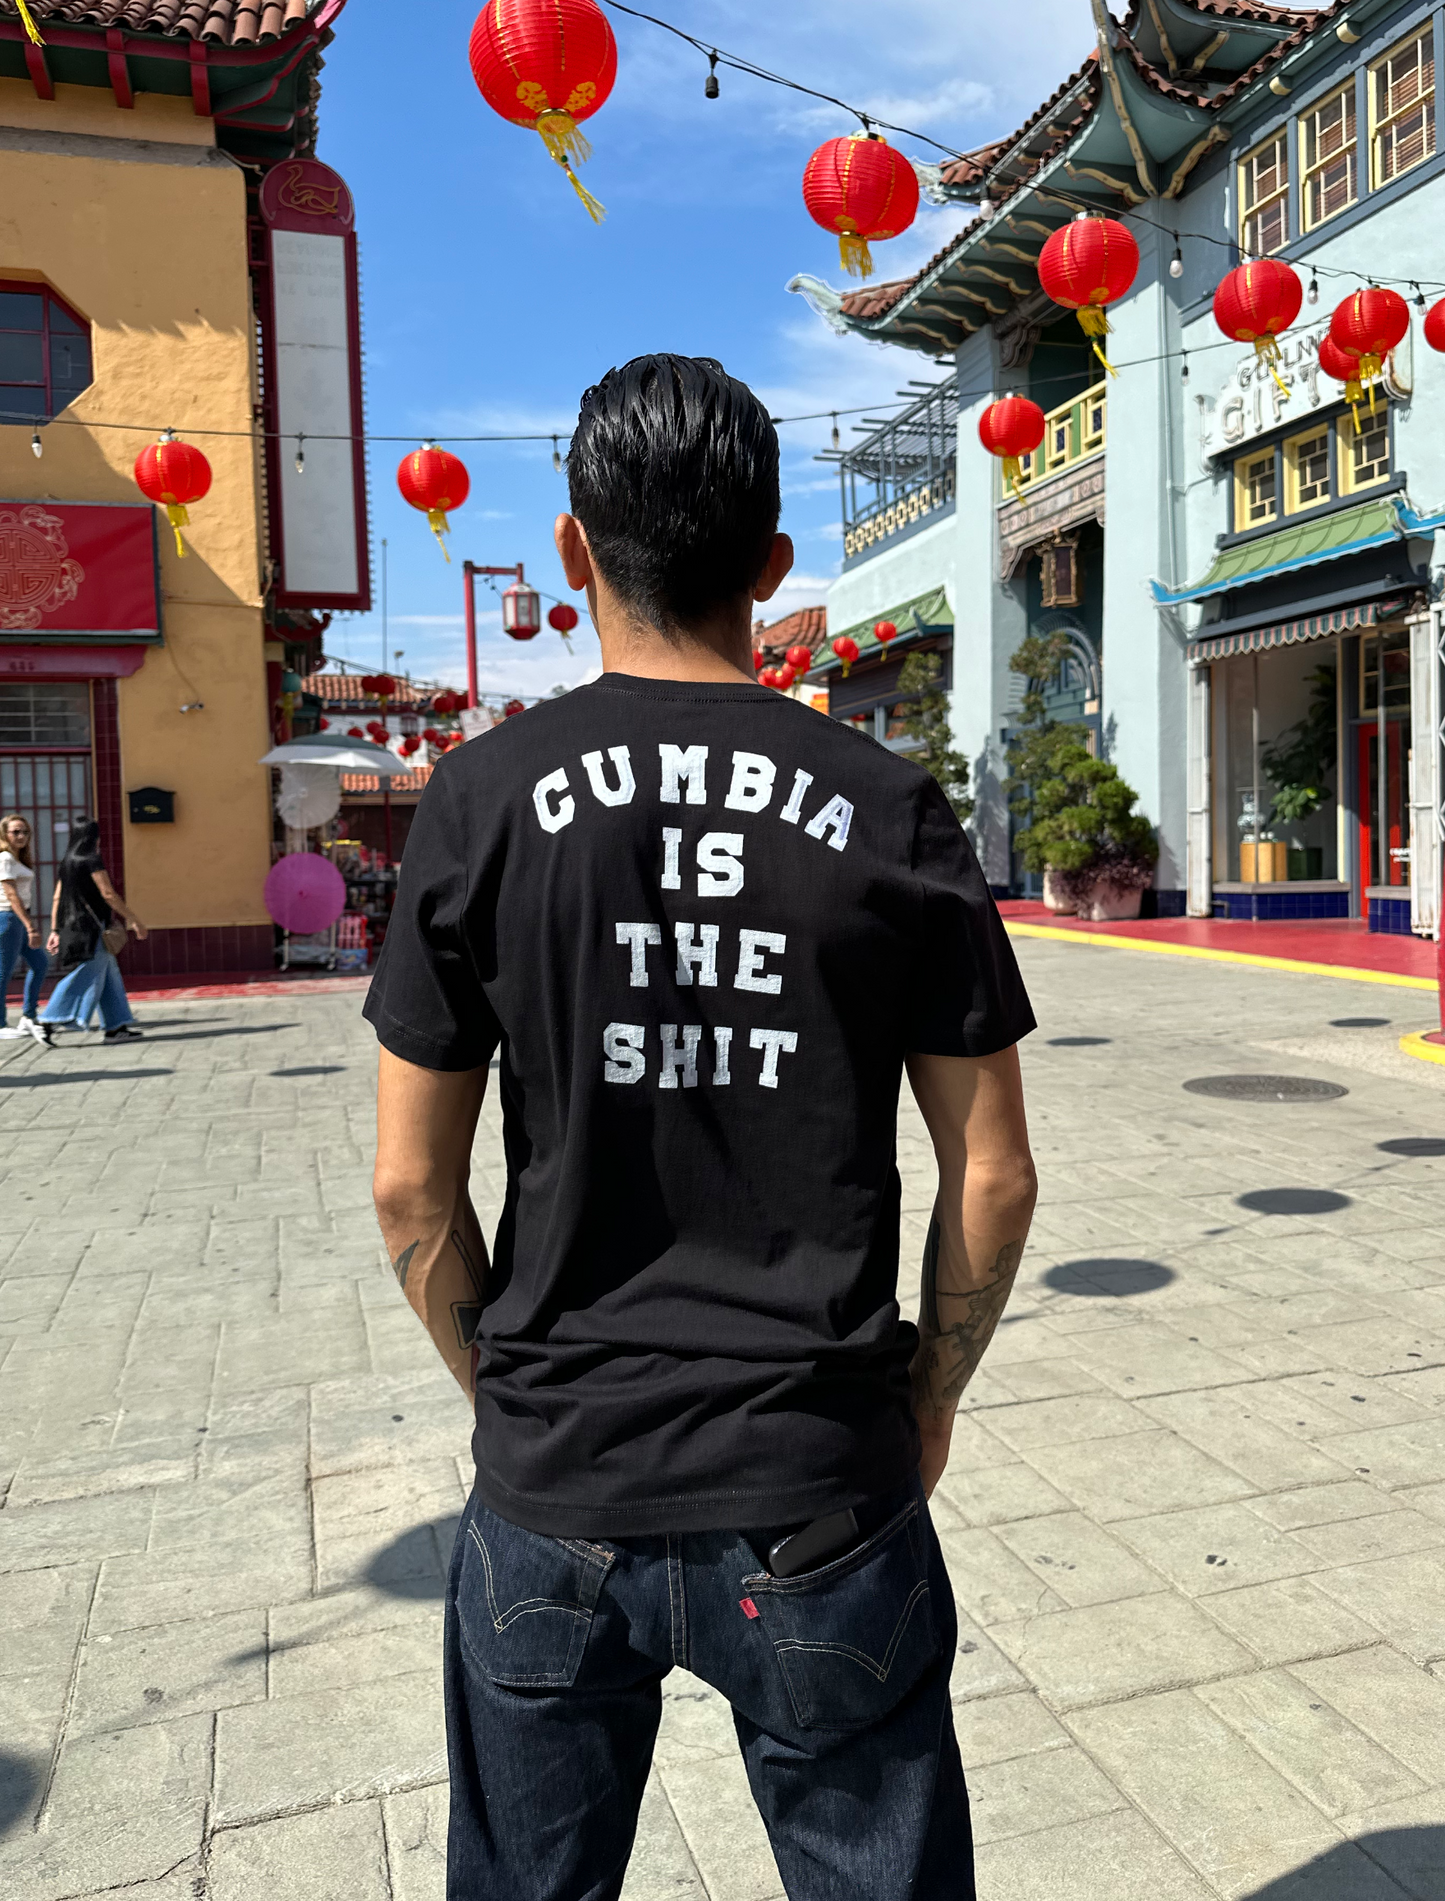 Cumbia Is The Shirt